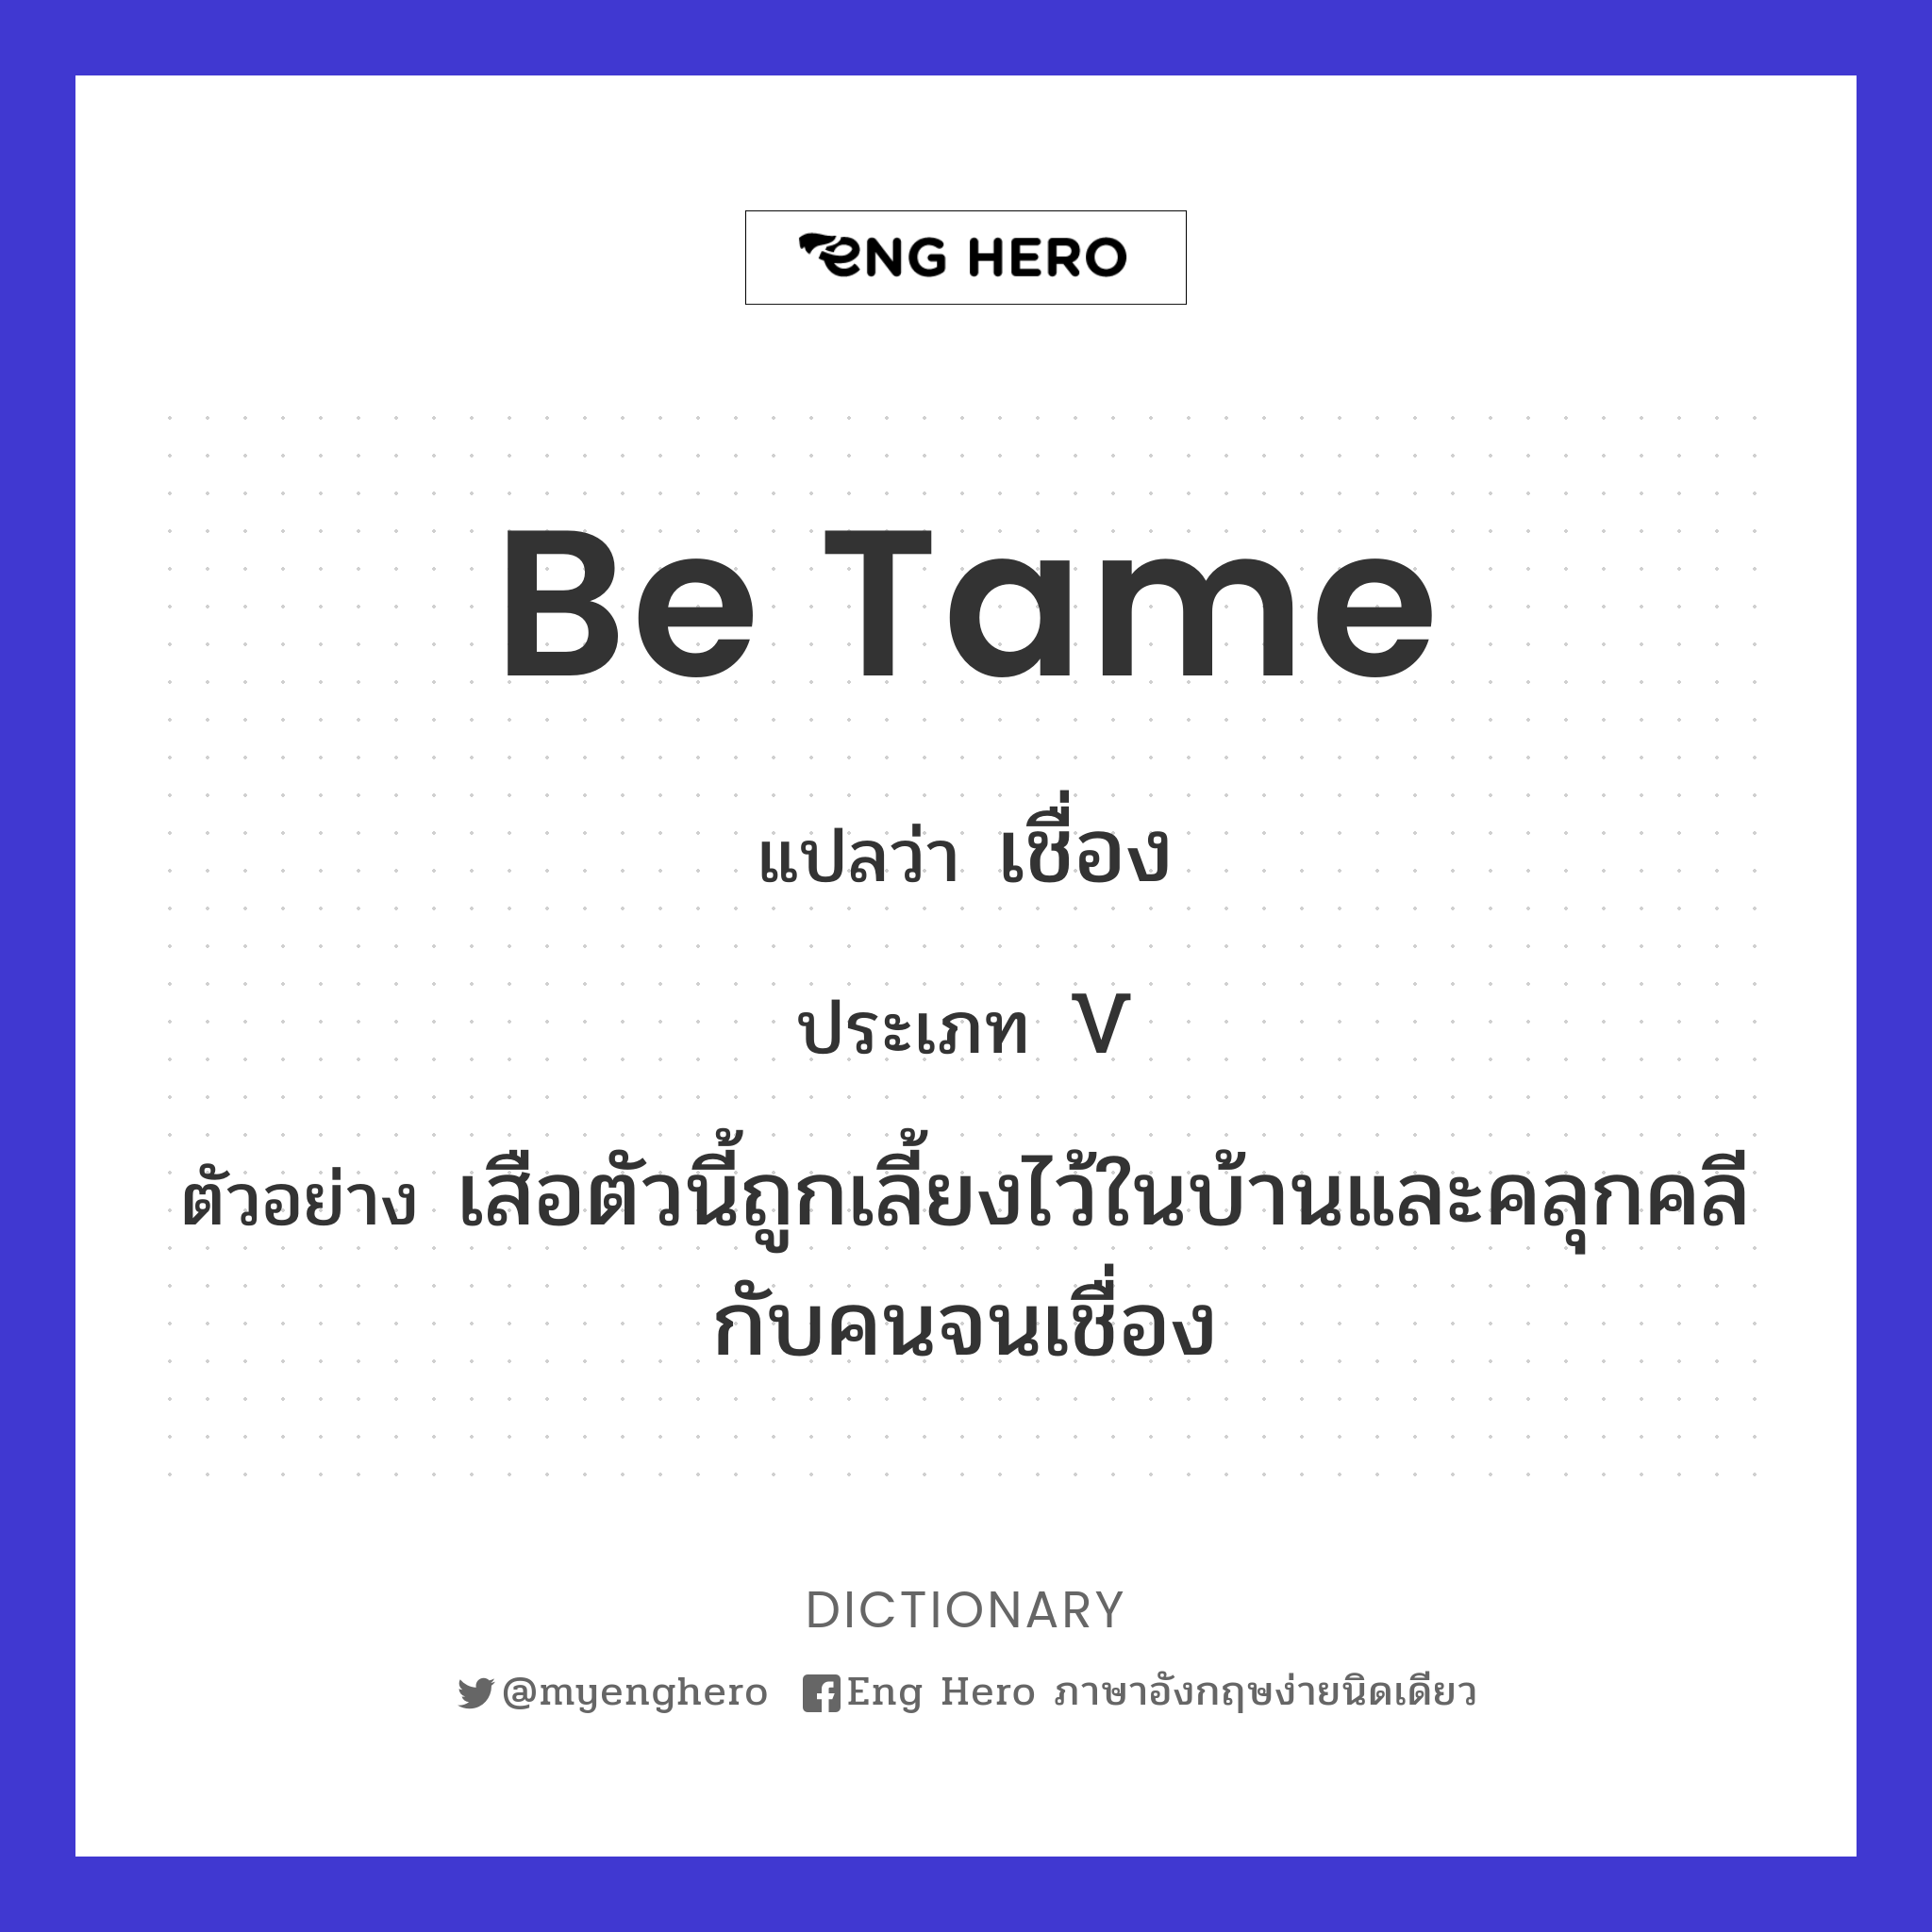 be tame